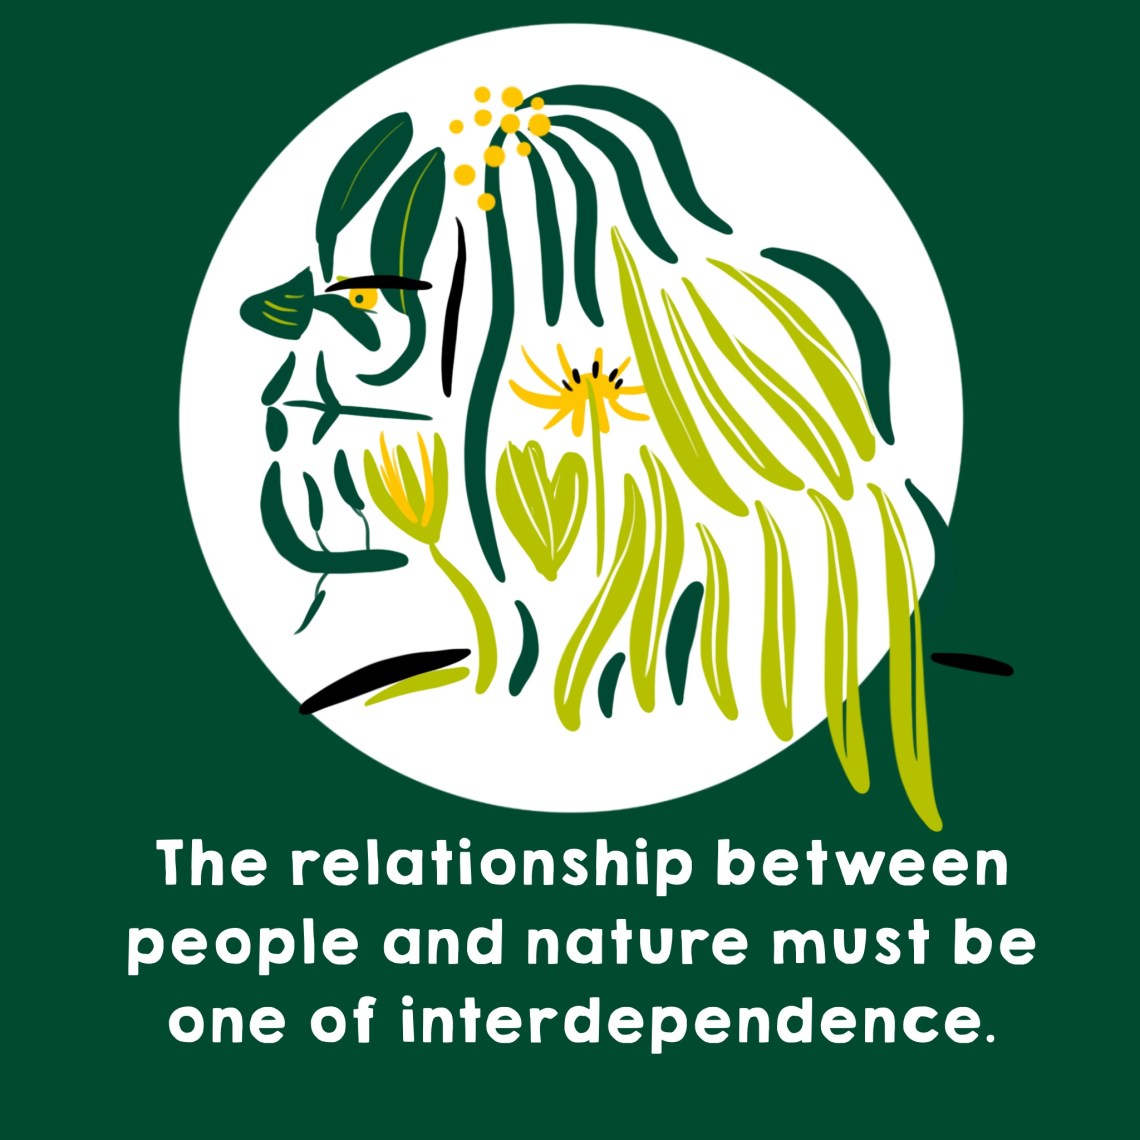 The relationship between people and nature must be one of interdependence